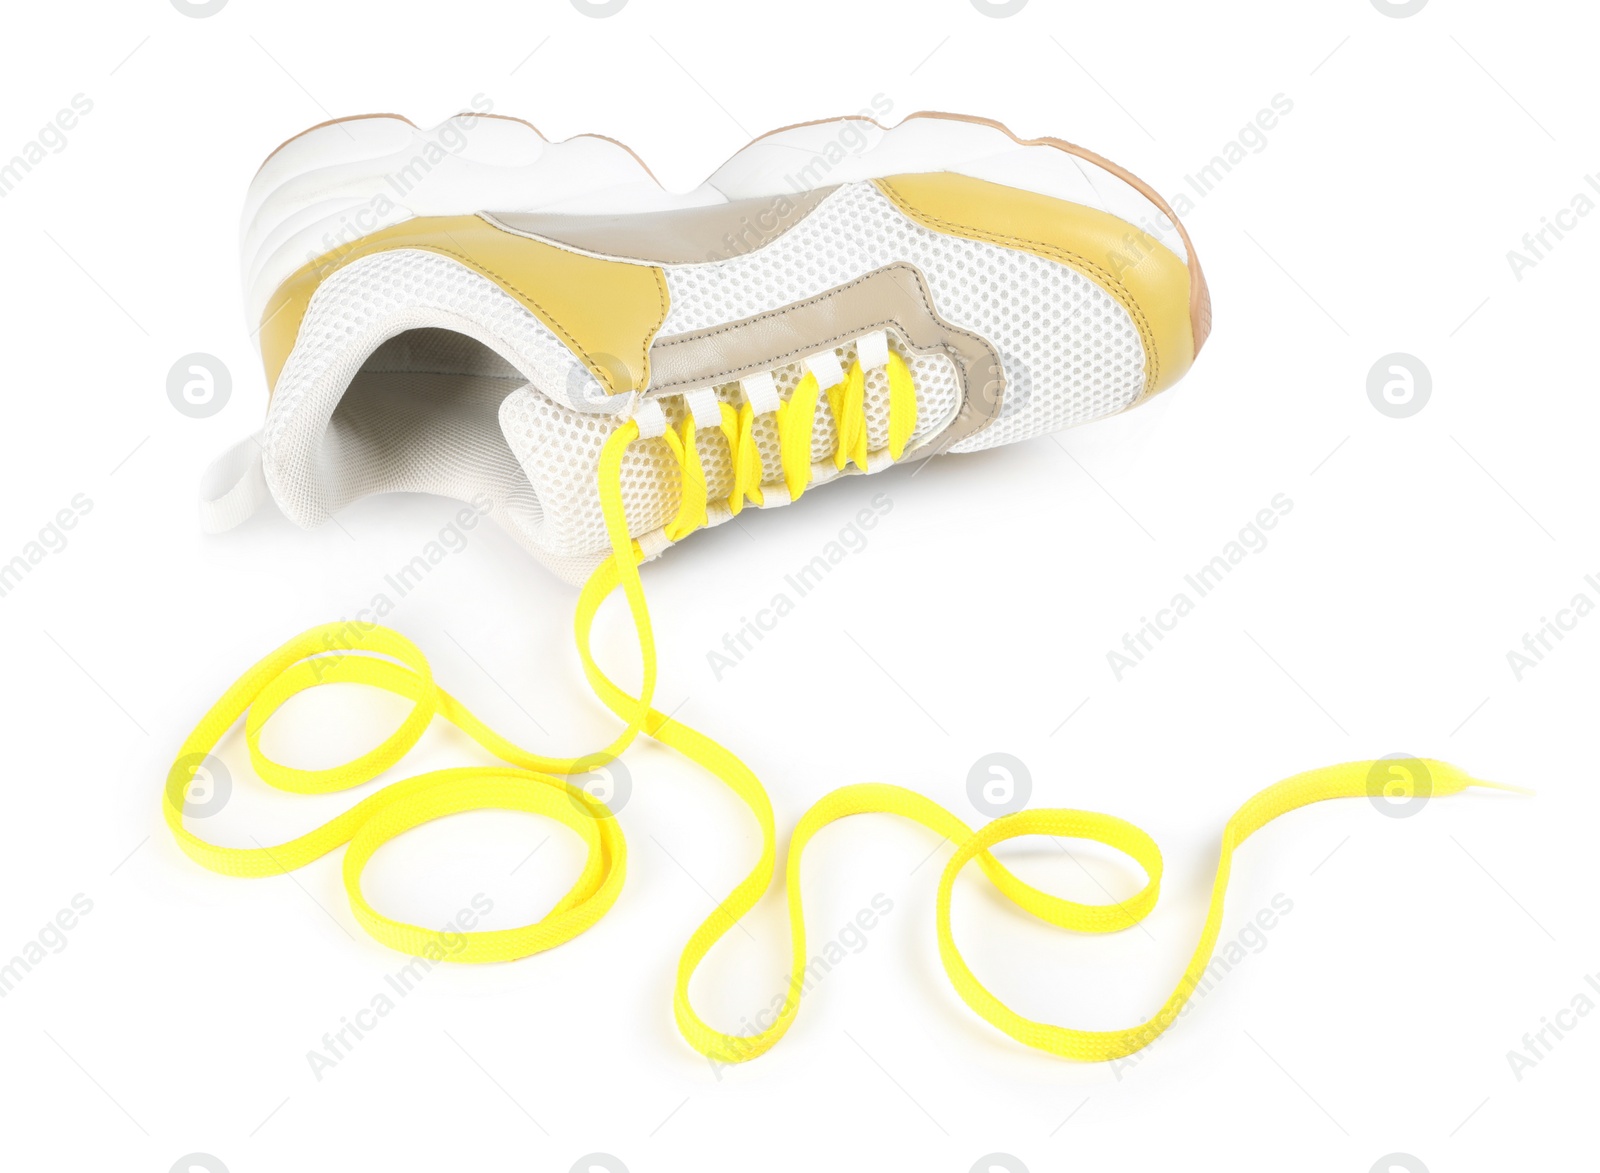 Photo of Stylish shoe and word Love made with yellow laces on white background